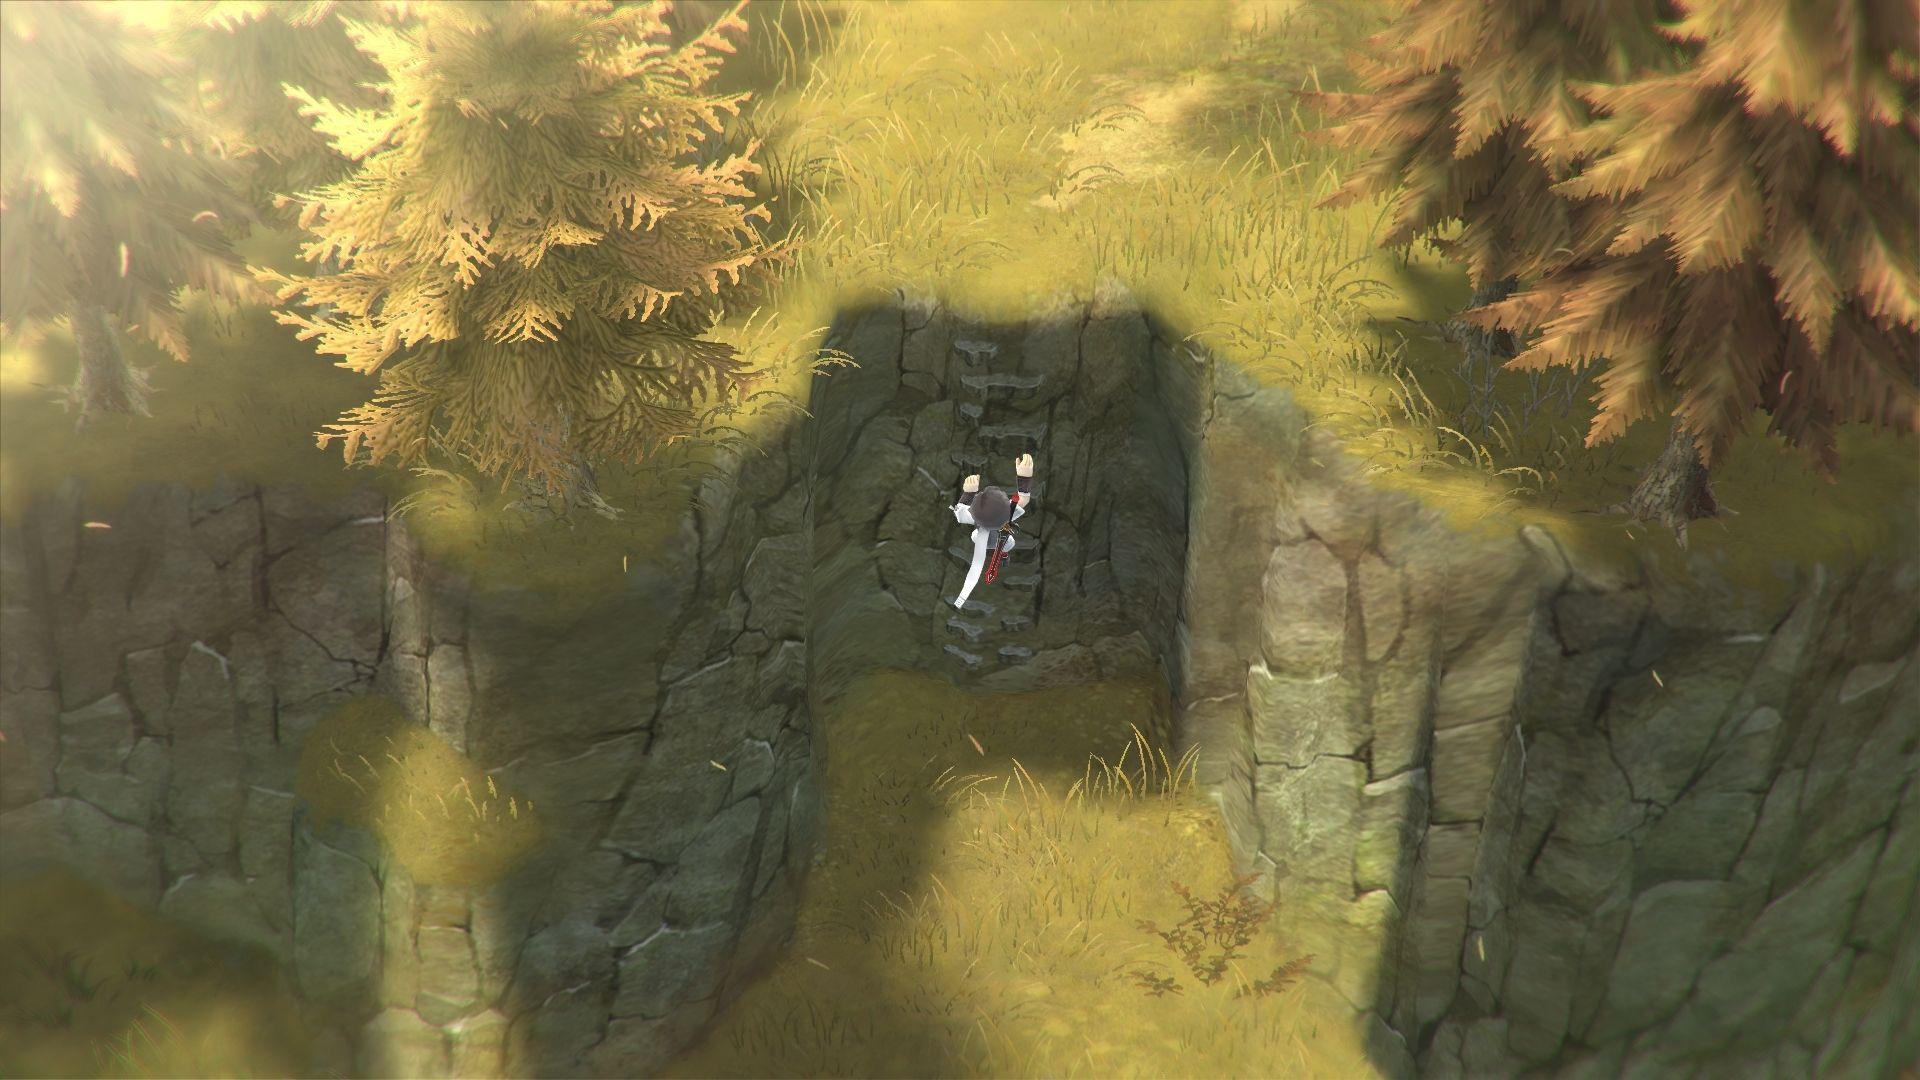 Square Enix Switch PS4 PC RPG Lost Sphear's New Screenshots Show